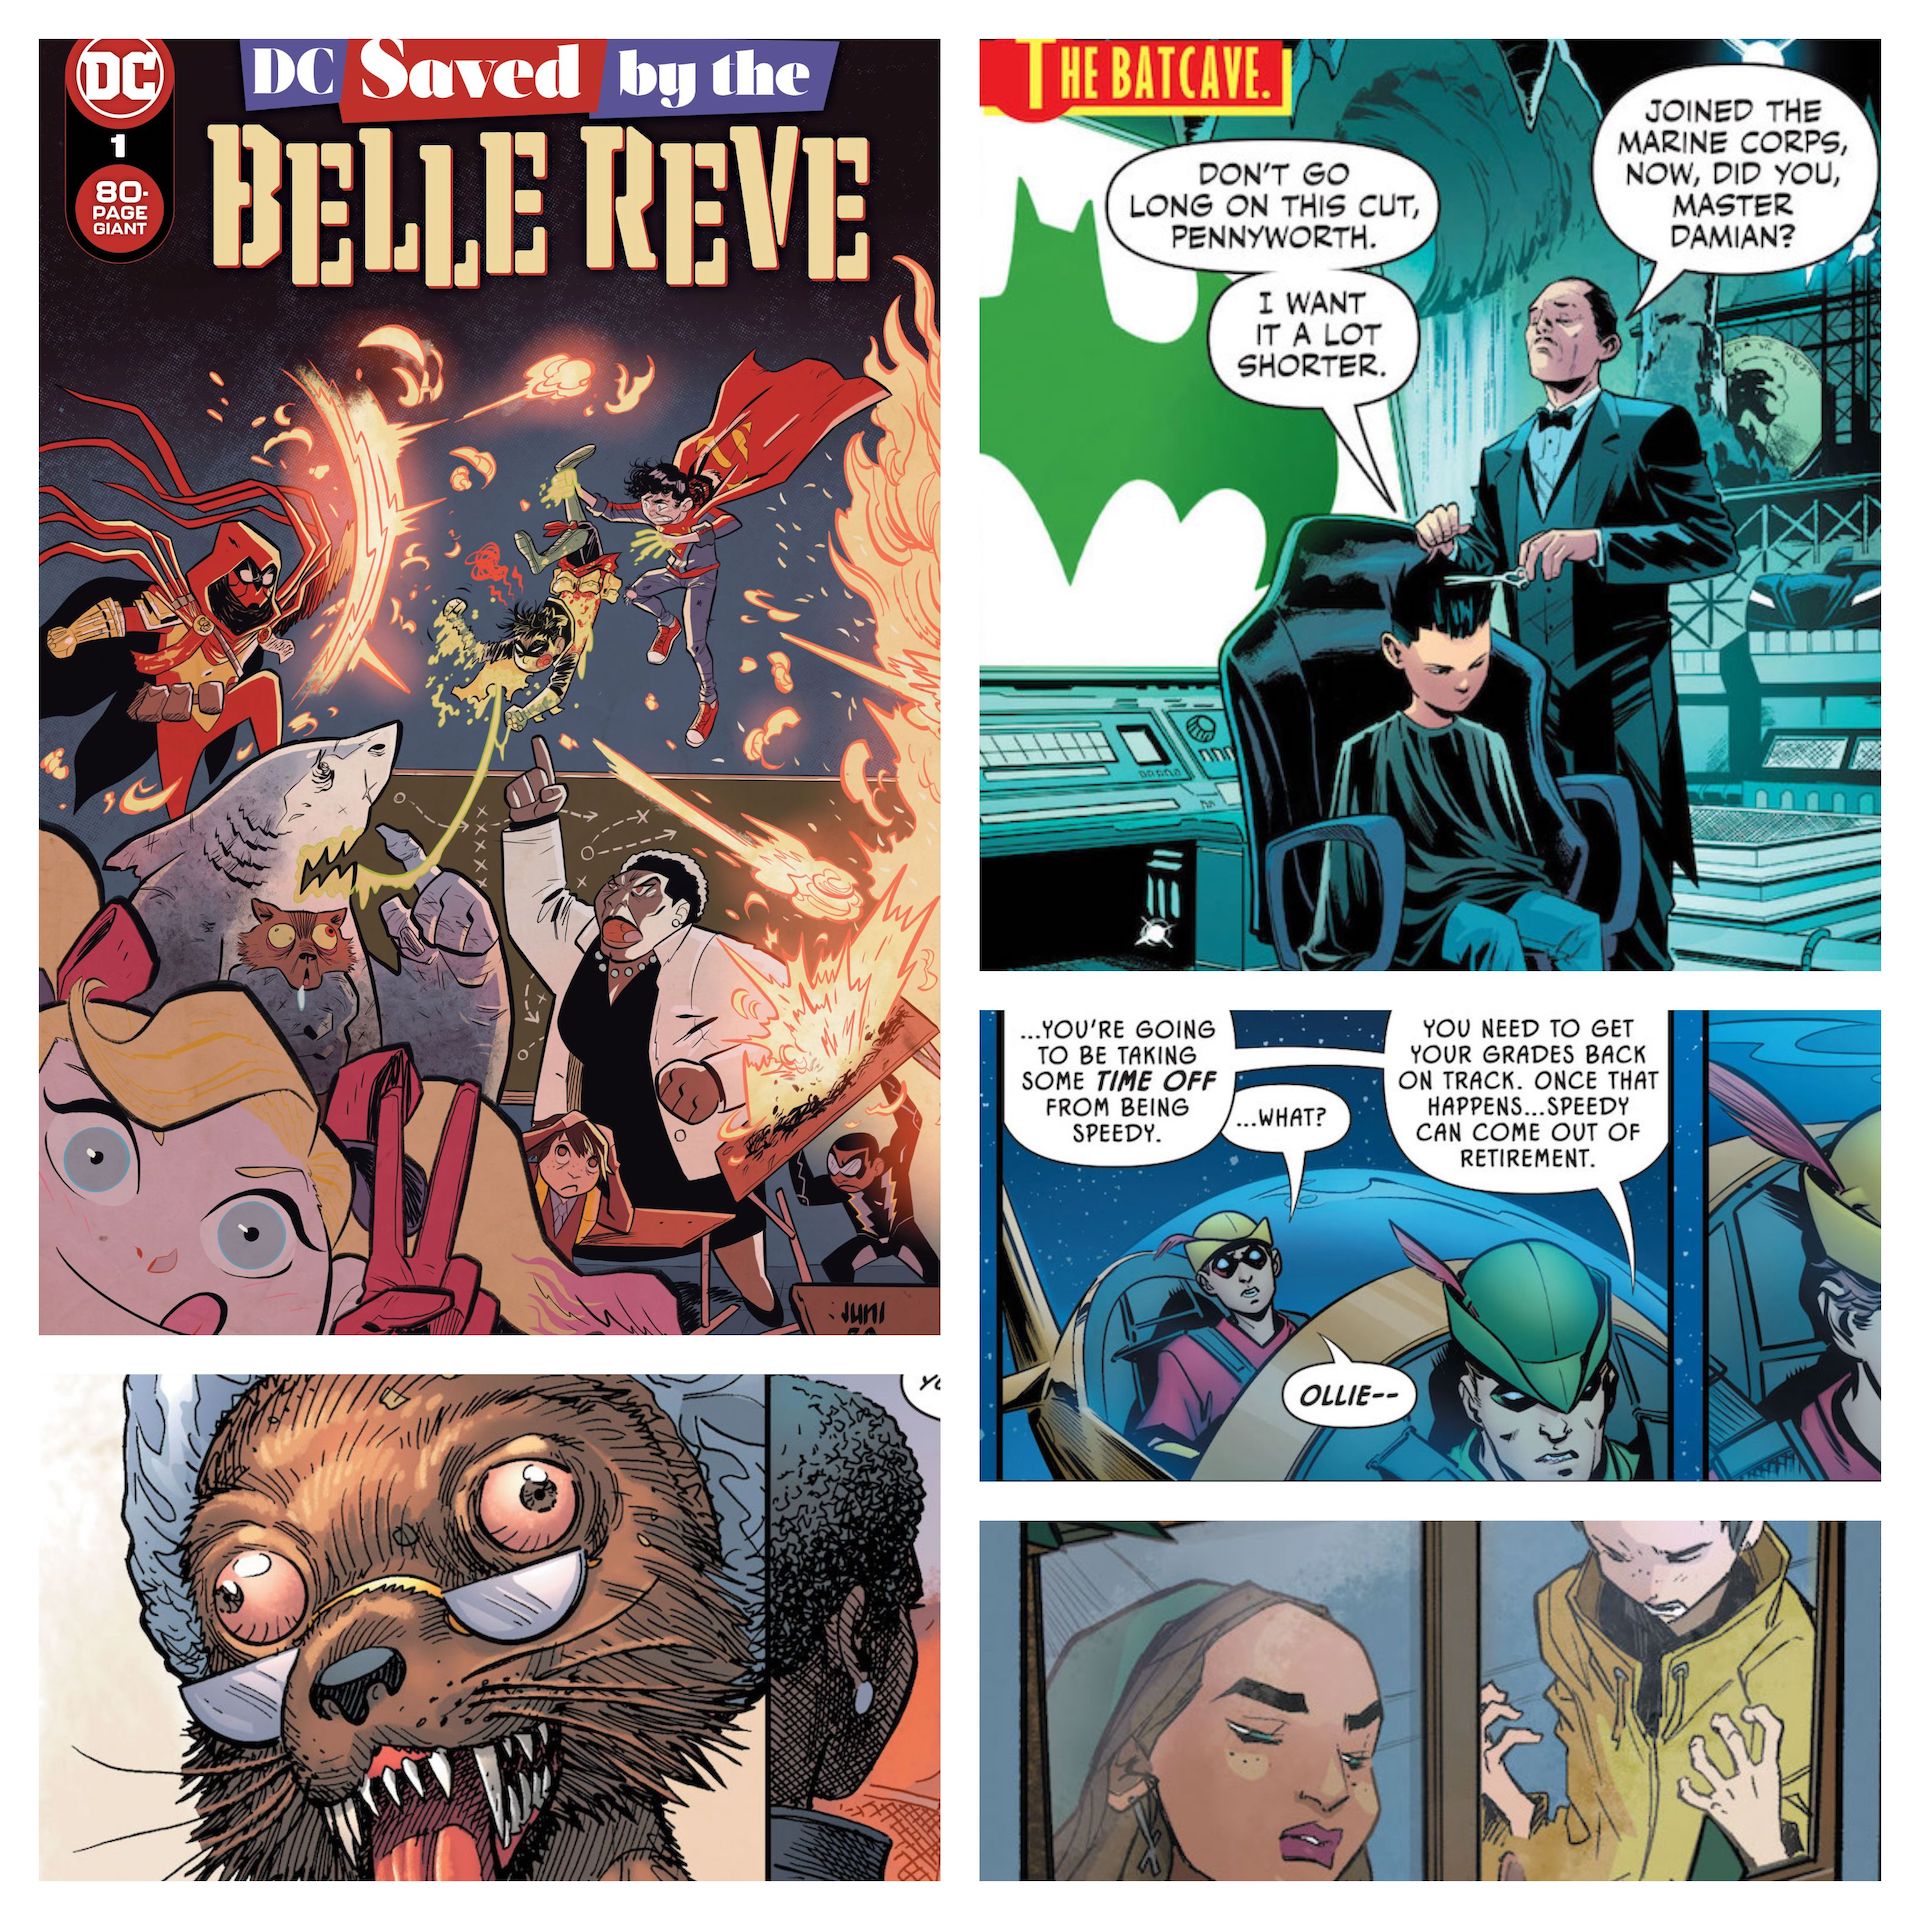 DC Comics goes back to school with 'DC's Saved by the Belle Reve' #1